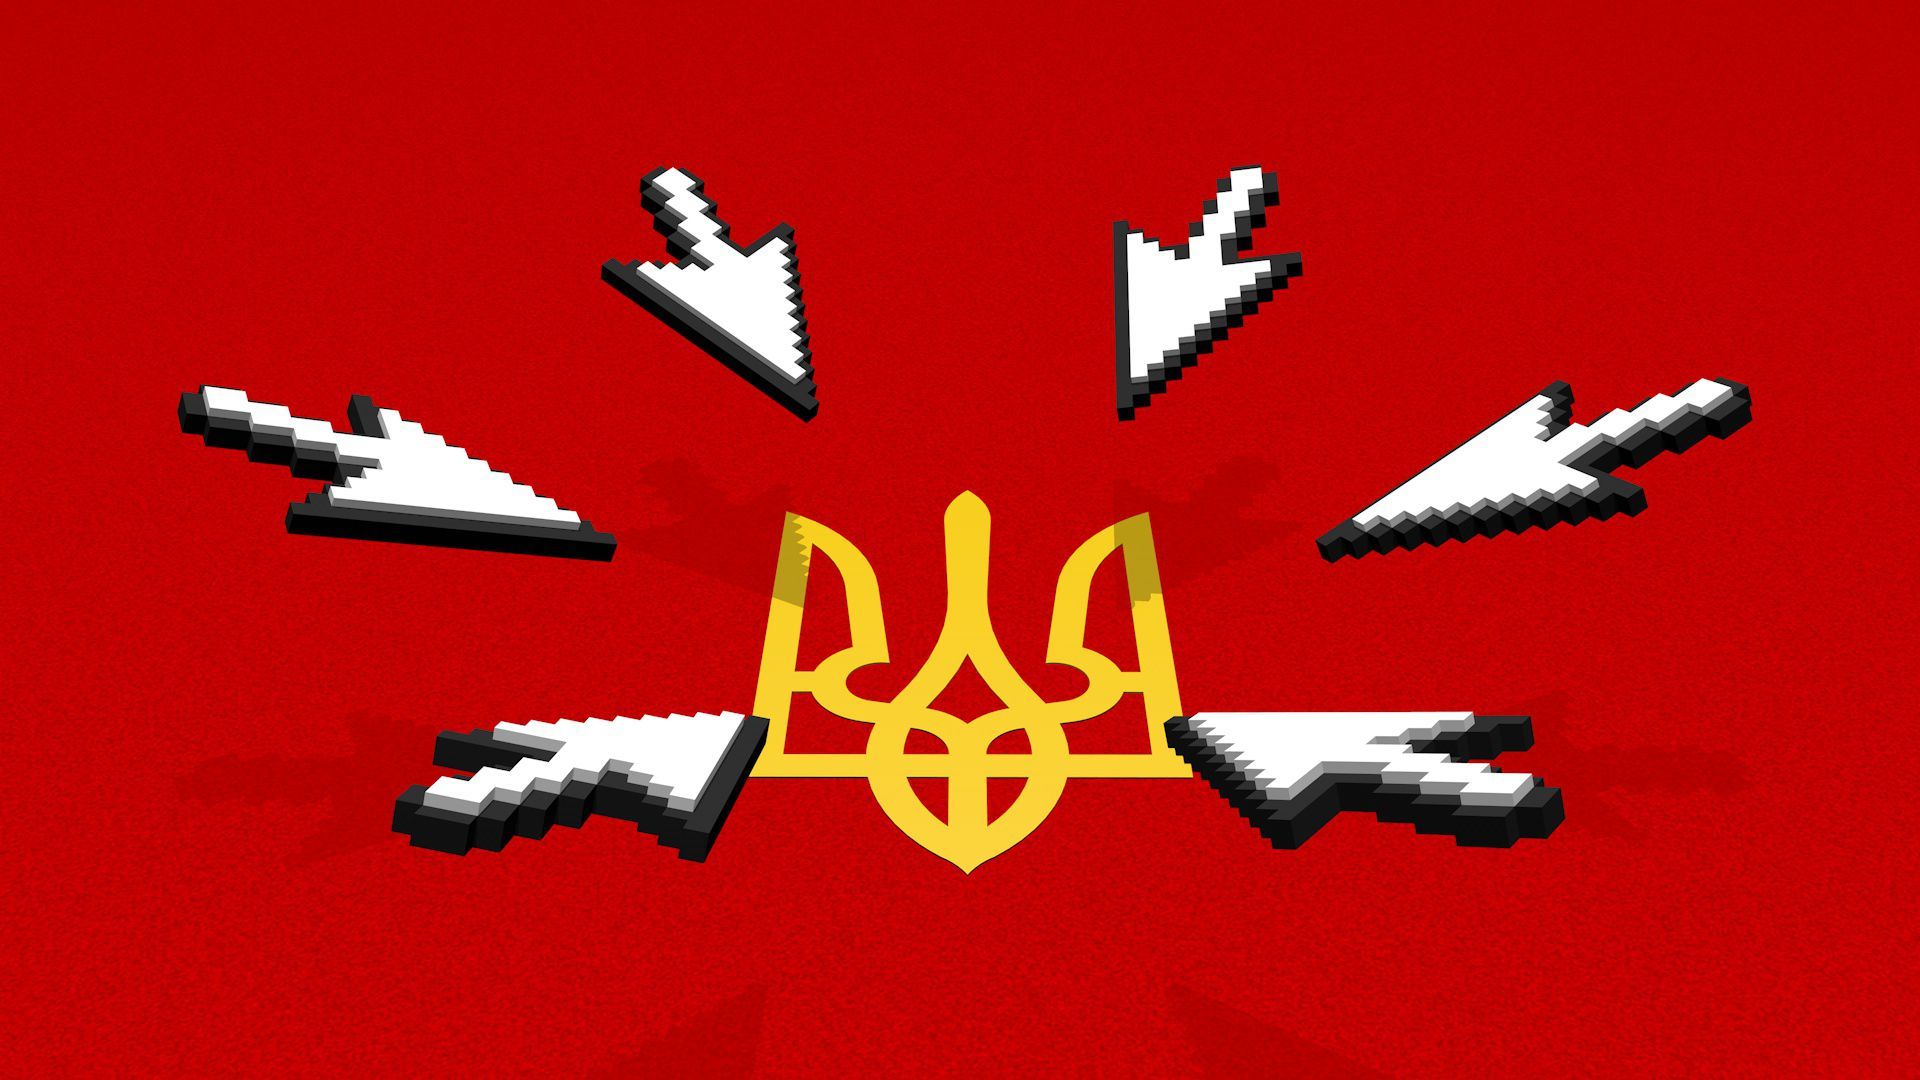 Illustration of the trident from Ukraine's coat of arms surrounded by threatening cursors.